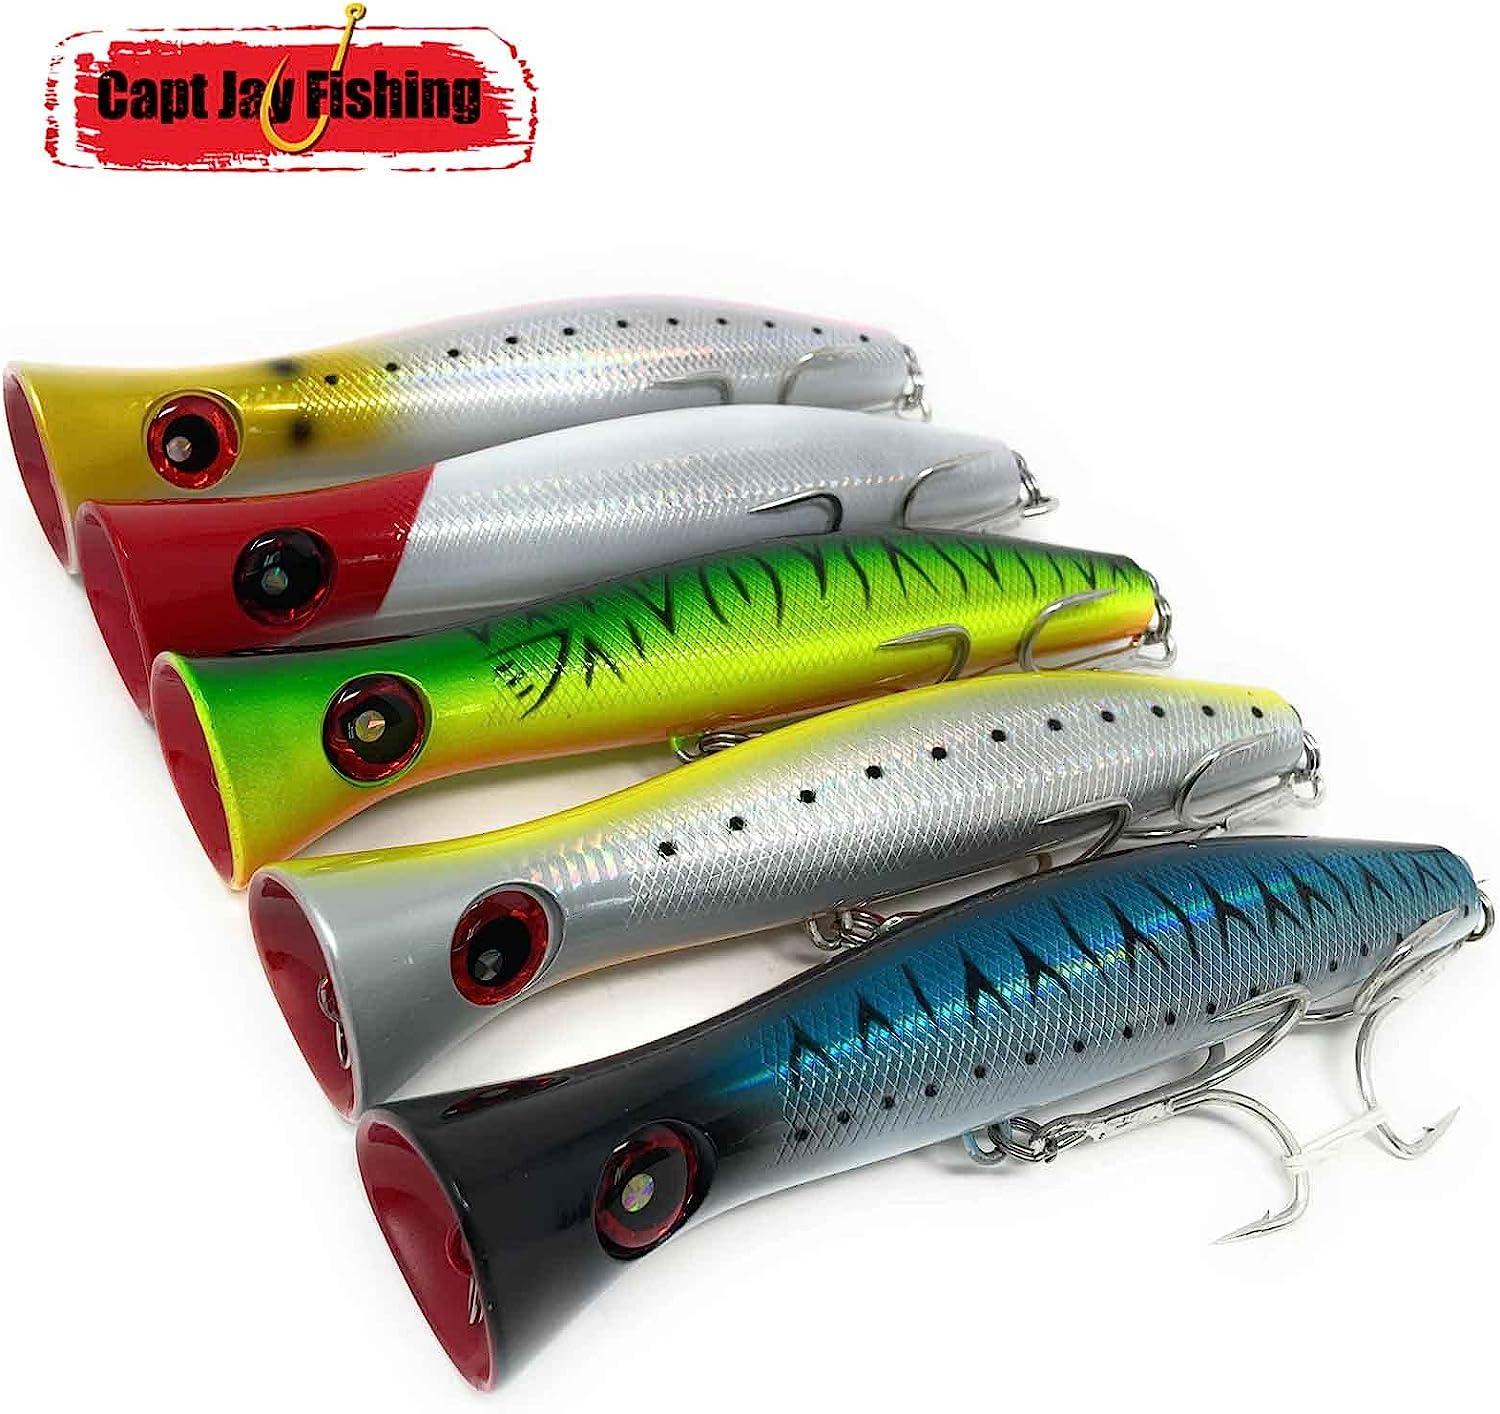 Capt Jay Fishing Fishing Lures Trolling Lures Saltwater for Tuna